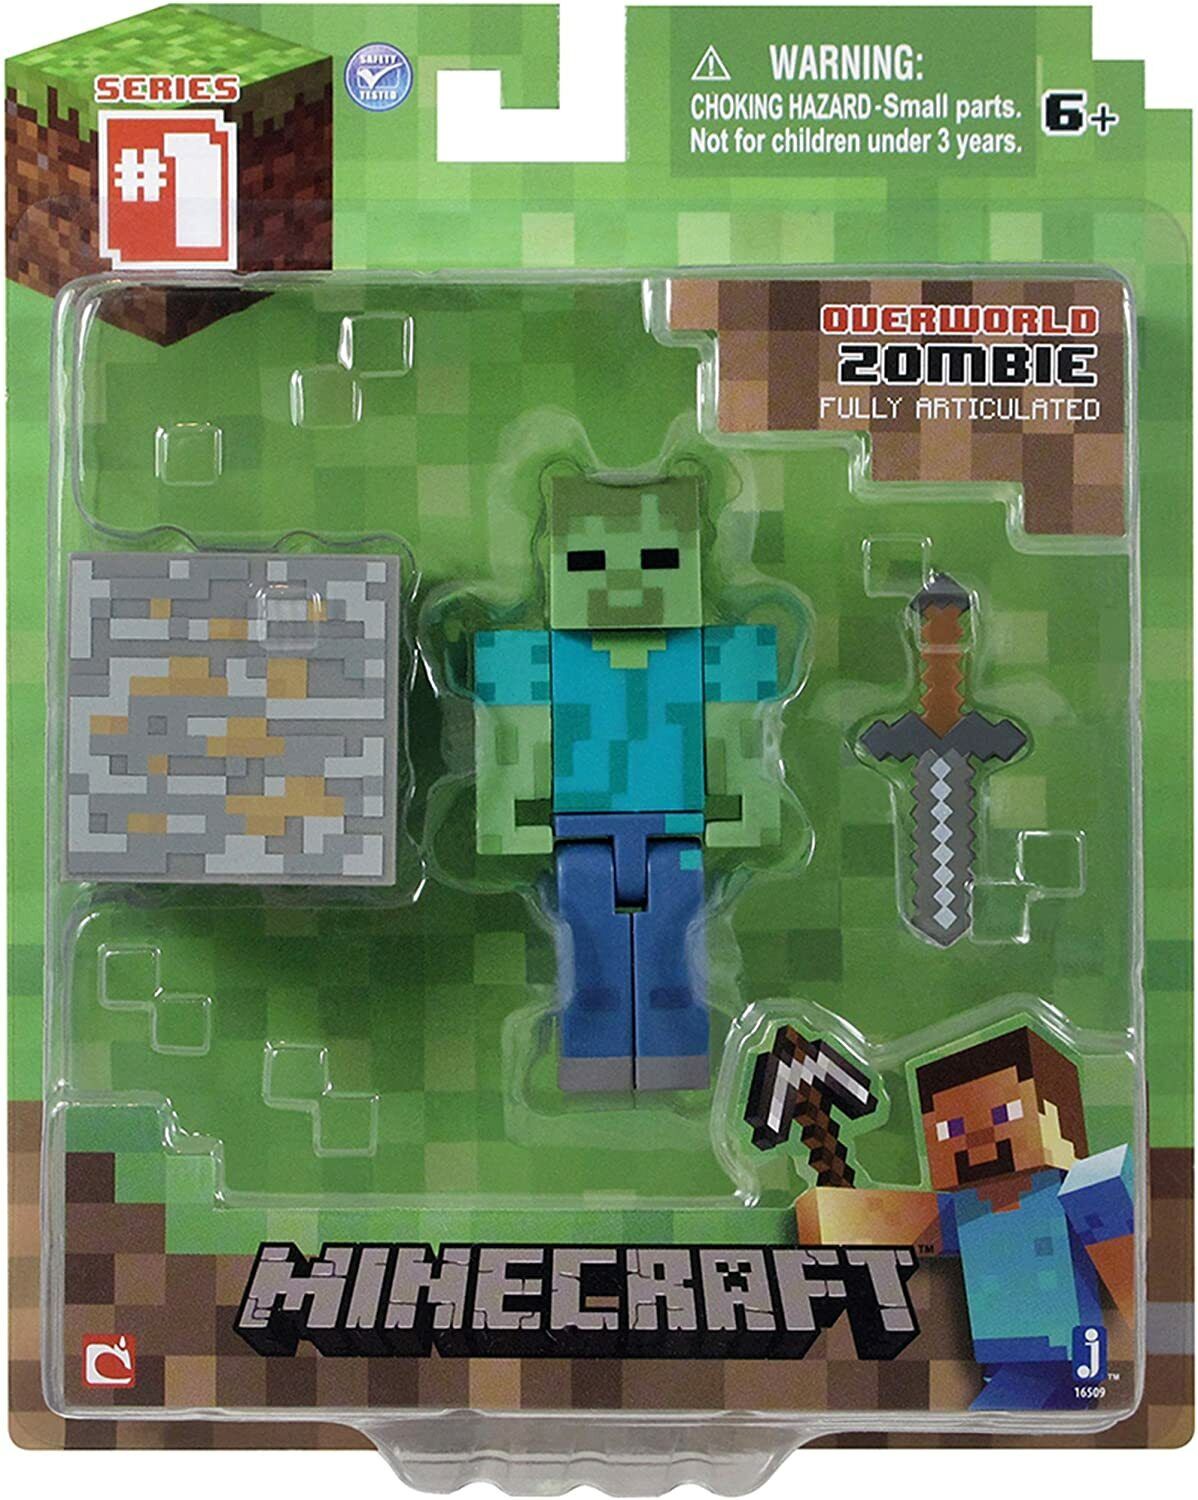 Minecraft Overworld Zombie Fully Articulated Action Figure